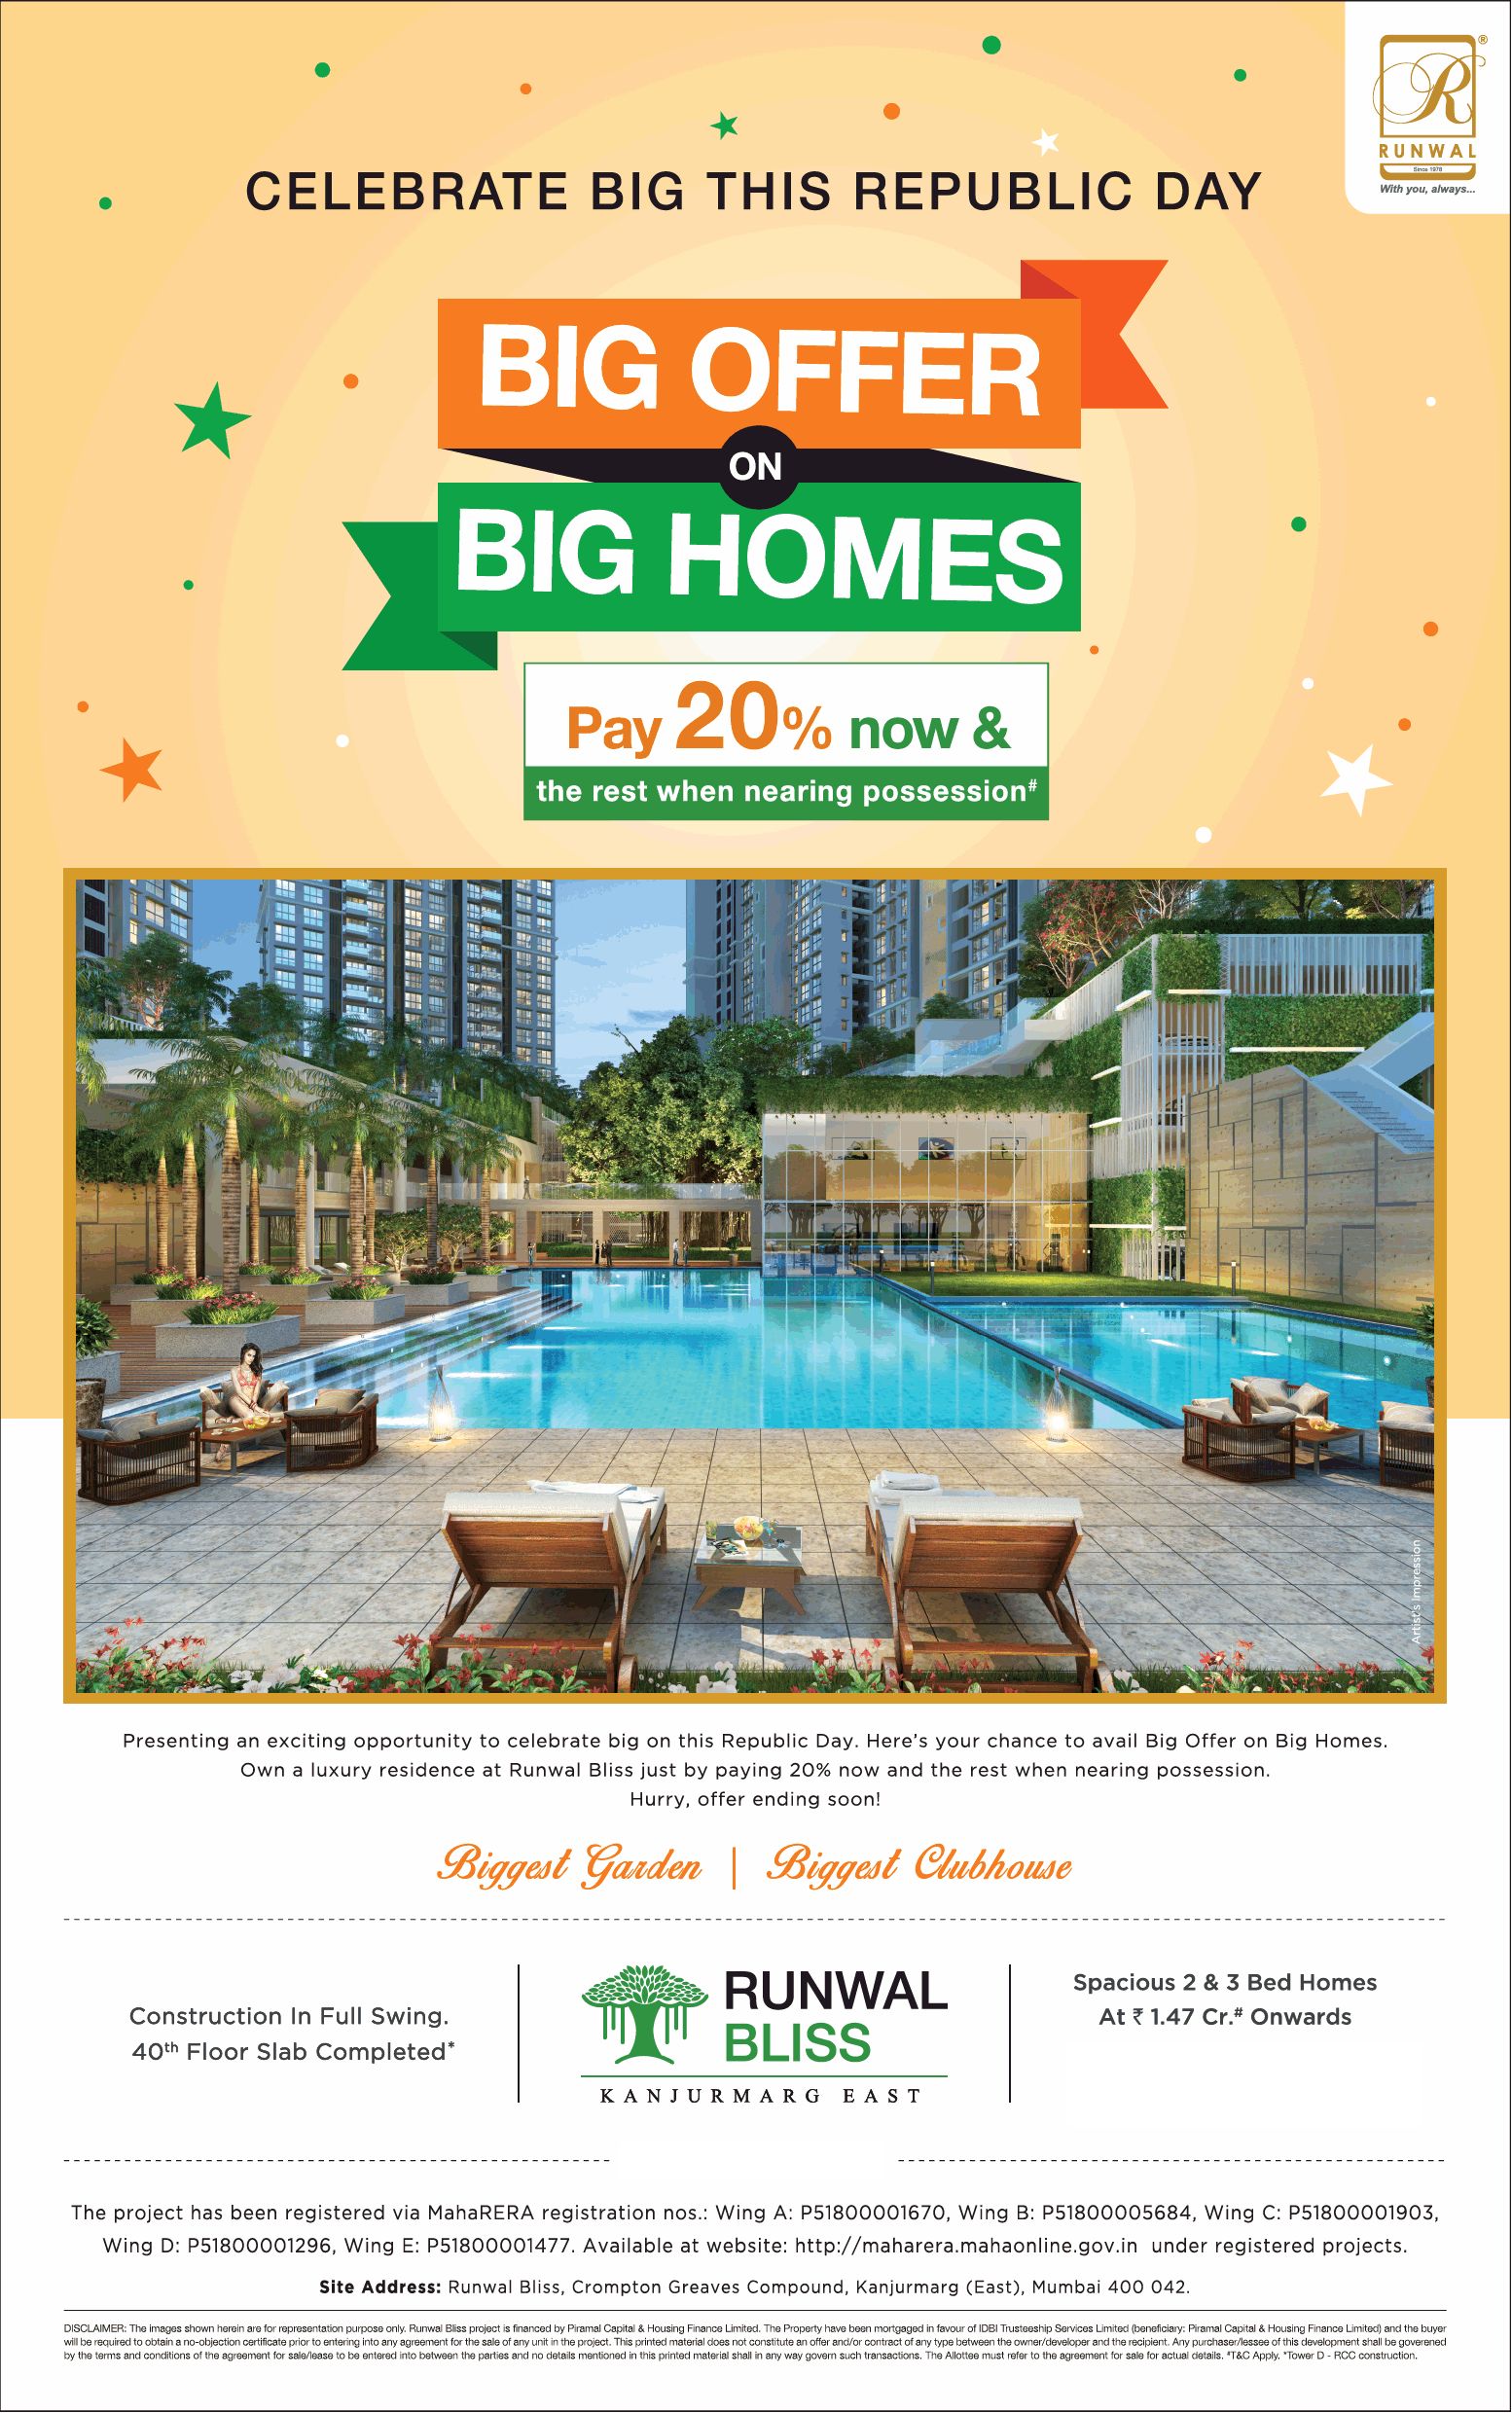 Pay 20% now & the rest when nearing possession at Runwal Bliss, Mumbai Update